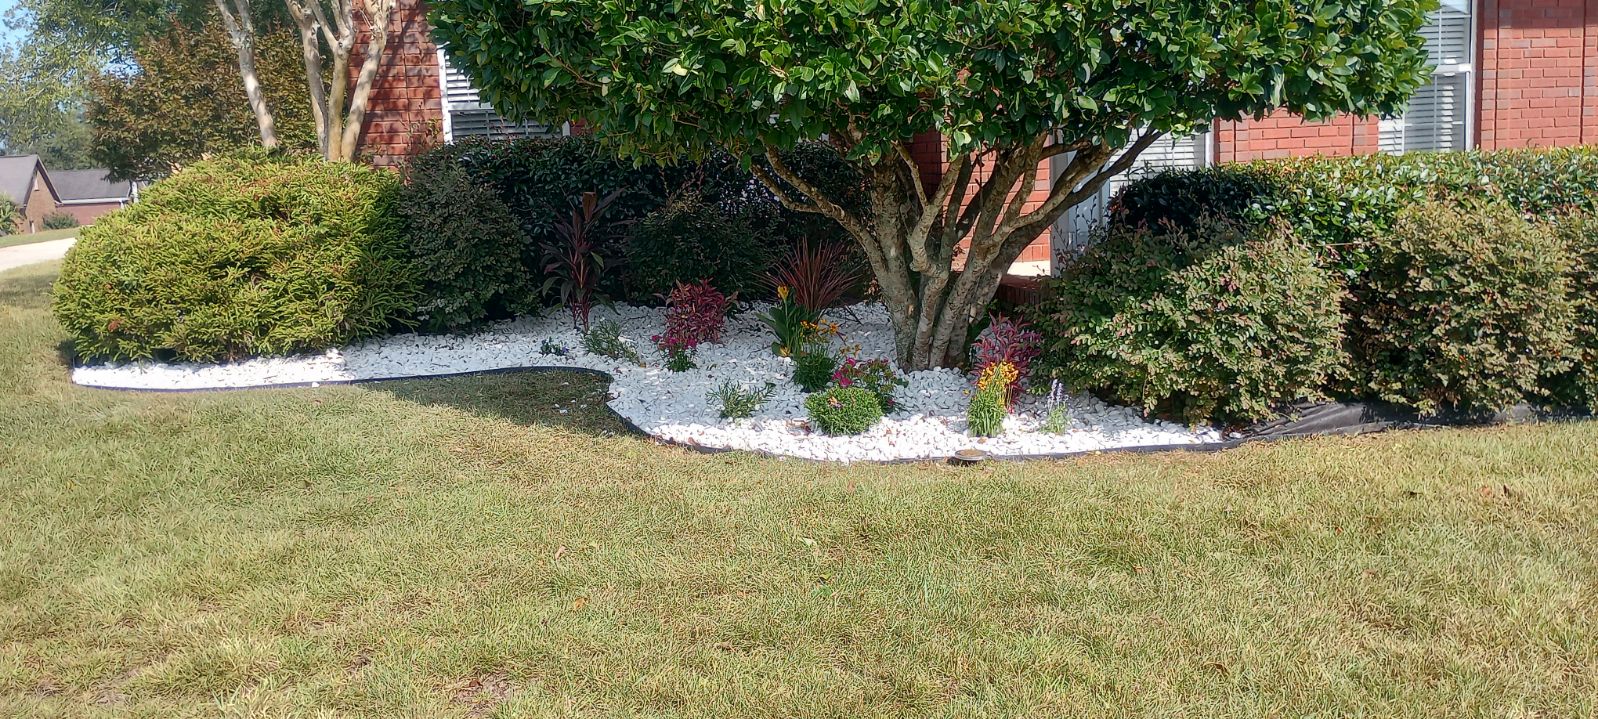 Top Quality Landscaping/Planting/Sodding Project in West Mobile AL 